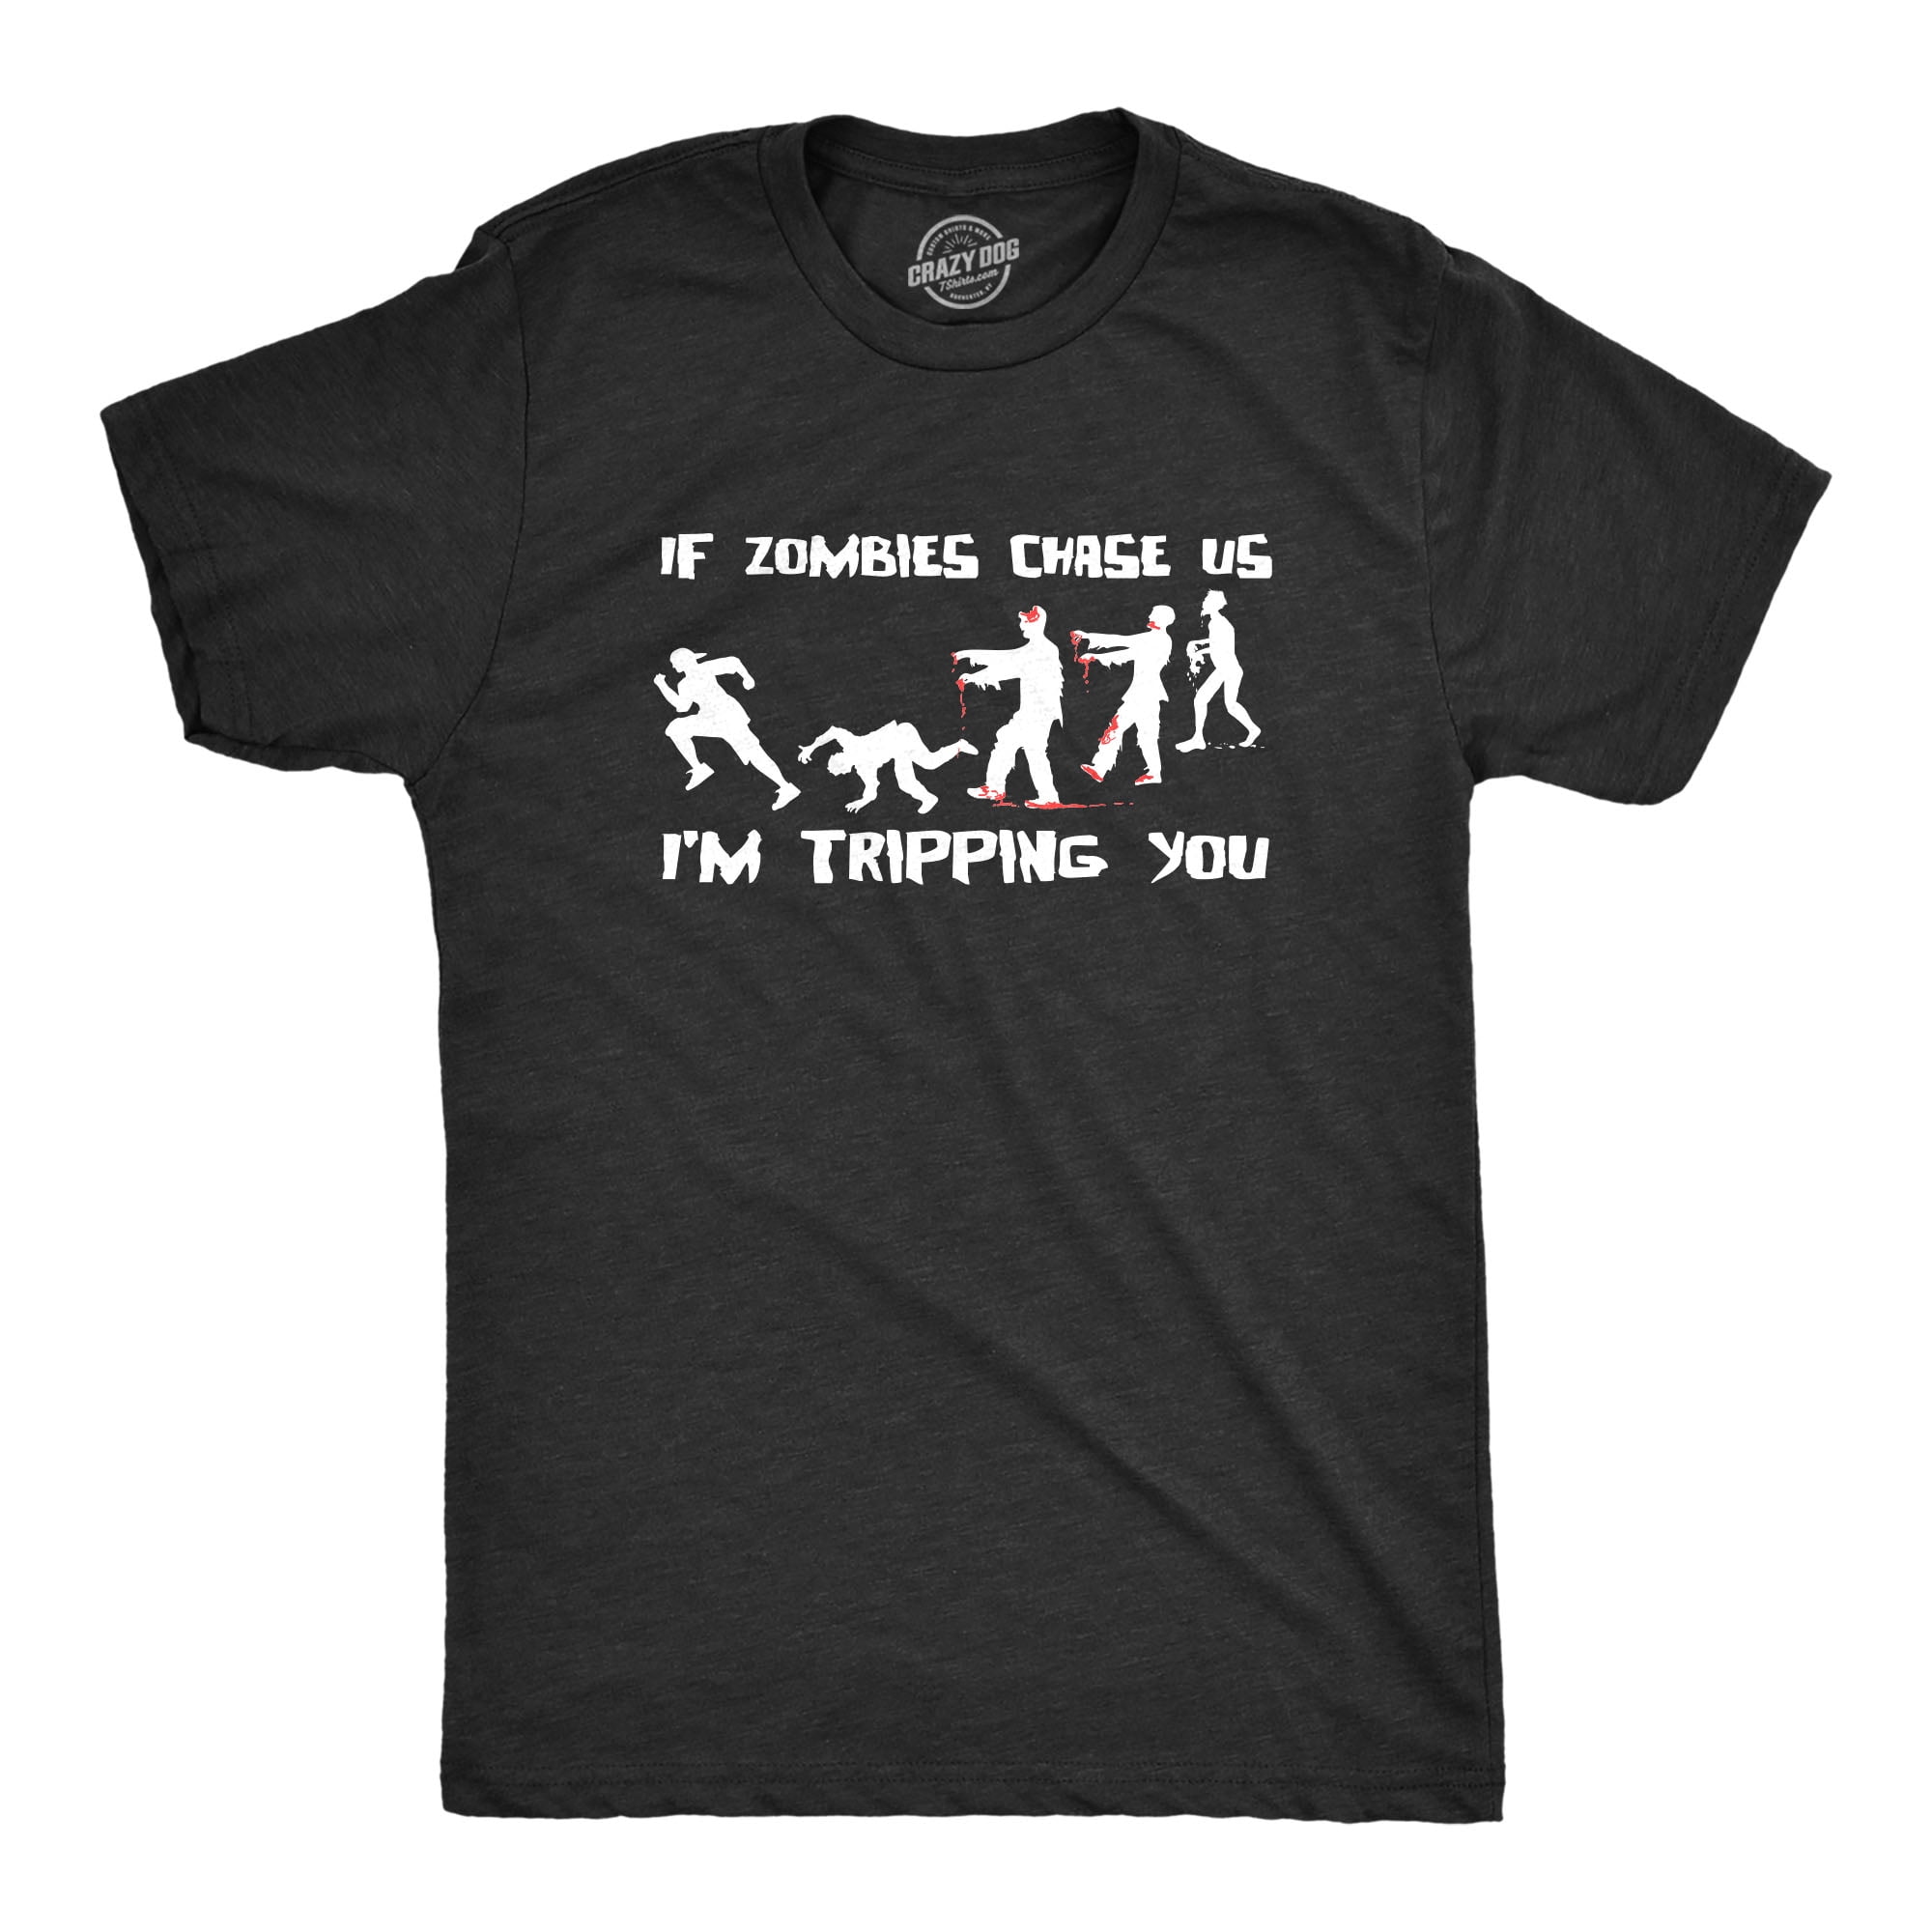 WARNING IF ZOMBIES CHASE US I'M TRIPPING YOU FUNNY Unisex Adult T-Shirt Tee Top 